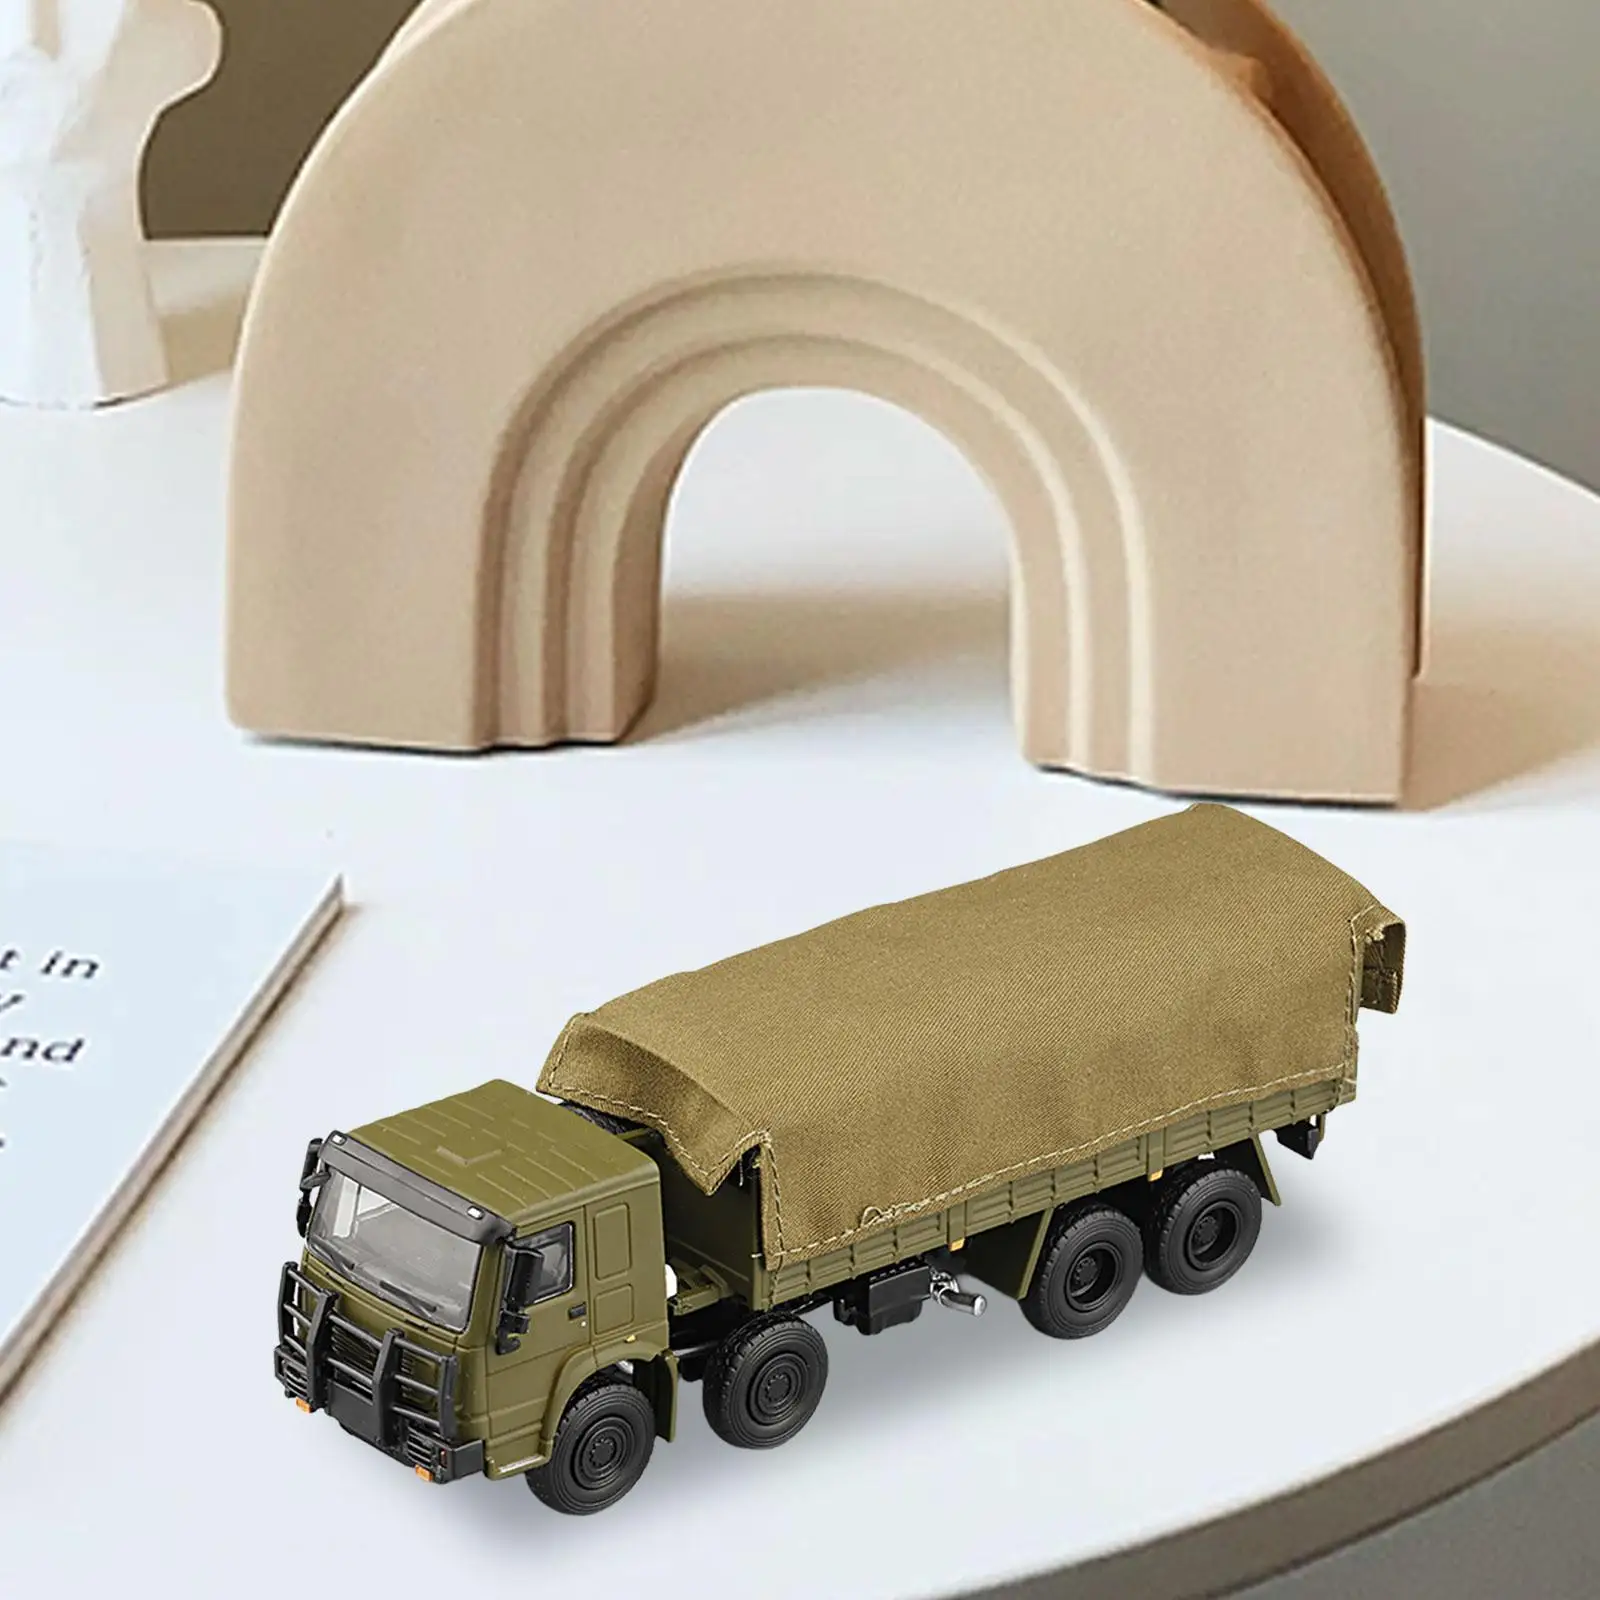 1:64 Diorama Street Car Model Desk Decoration Alloy Classic Car Model for Micro Landscapes Photography Props Diorama Decoration